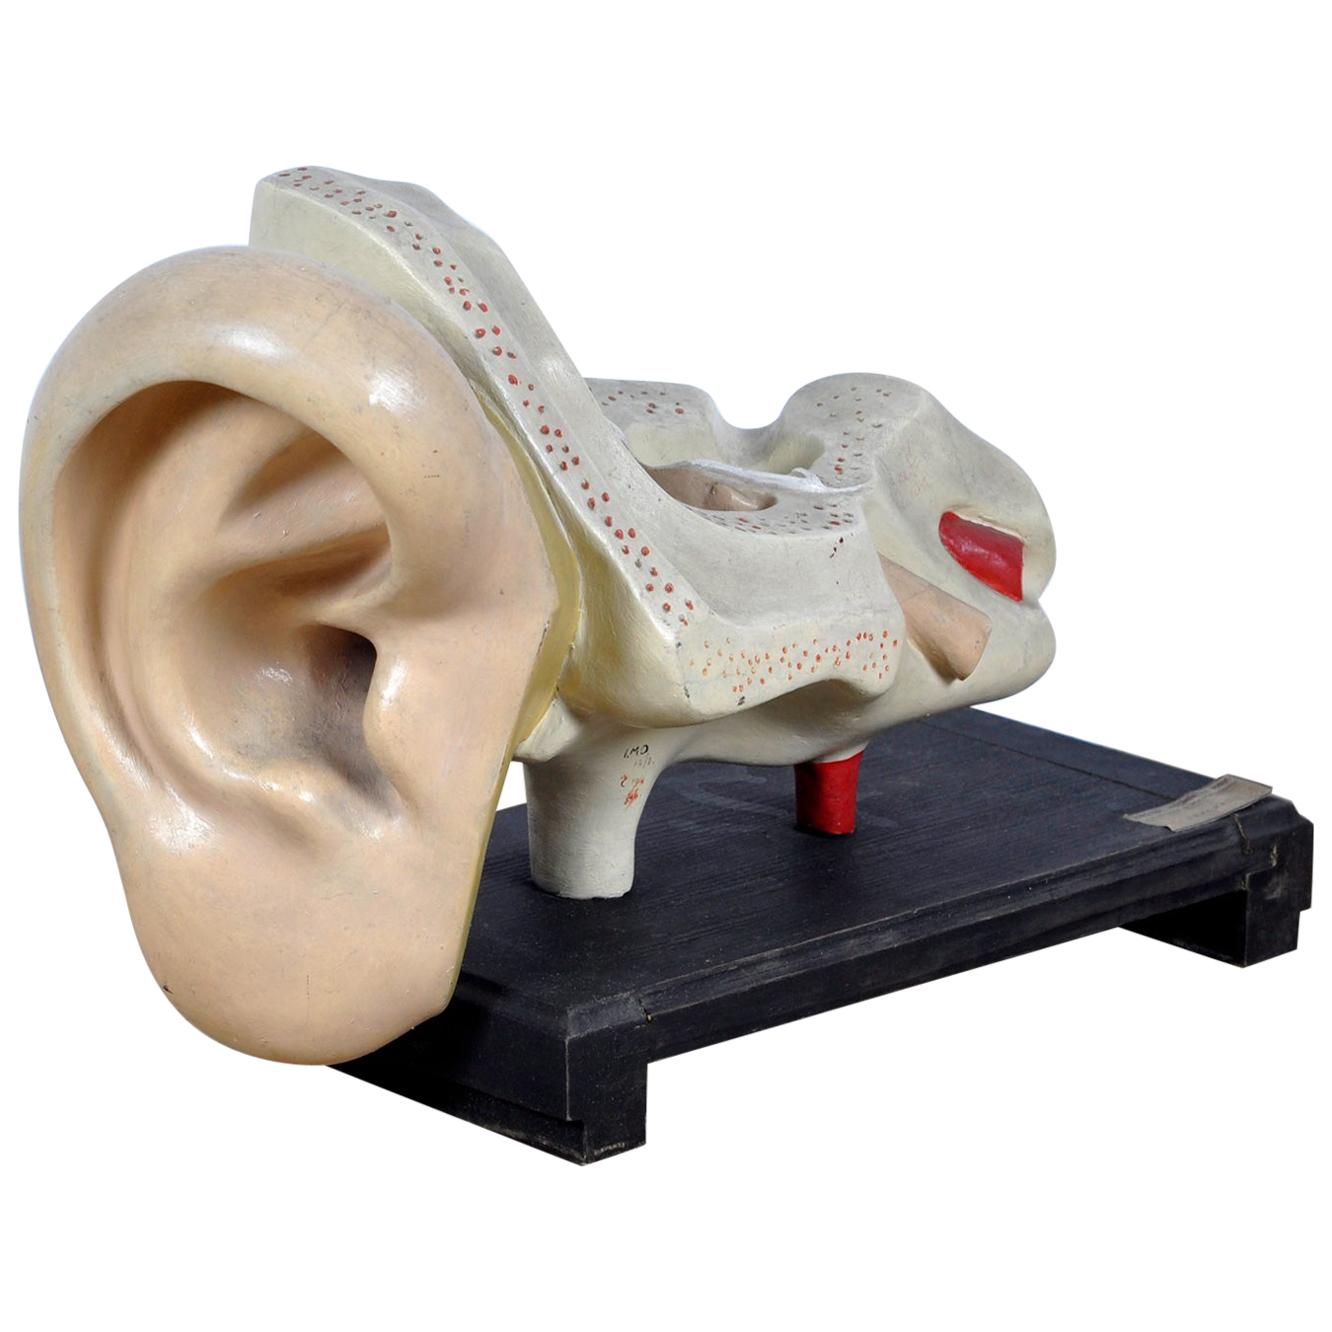 Anatomical Model of the Ear, 1952